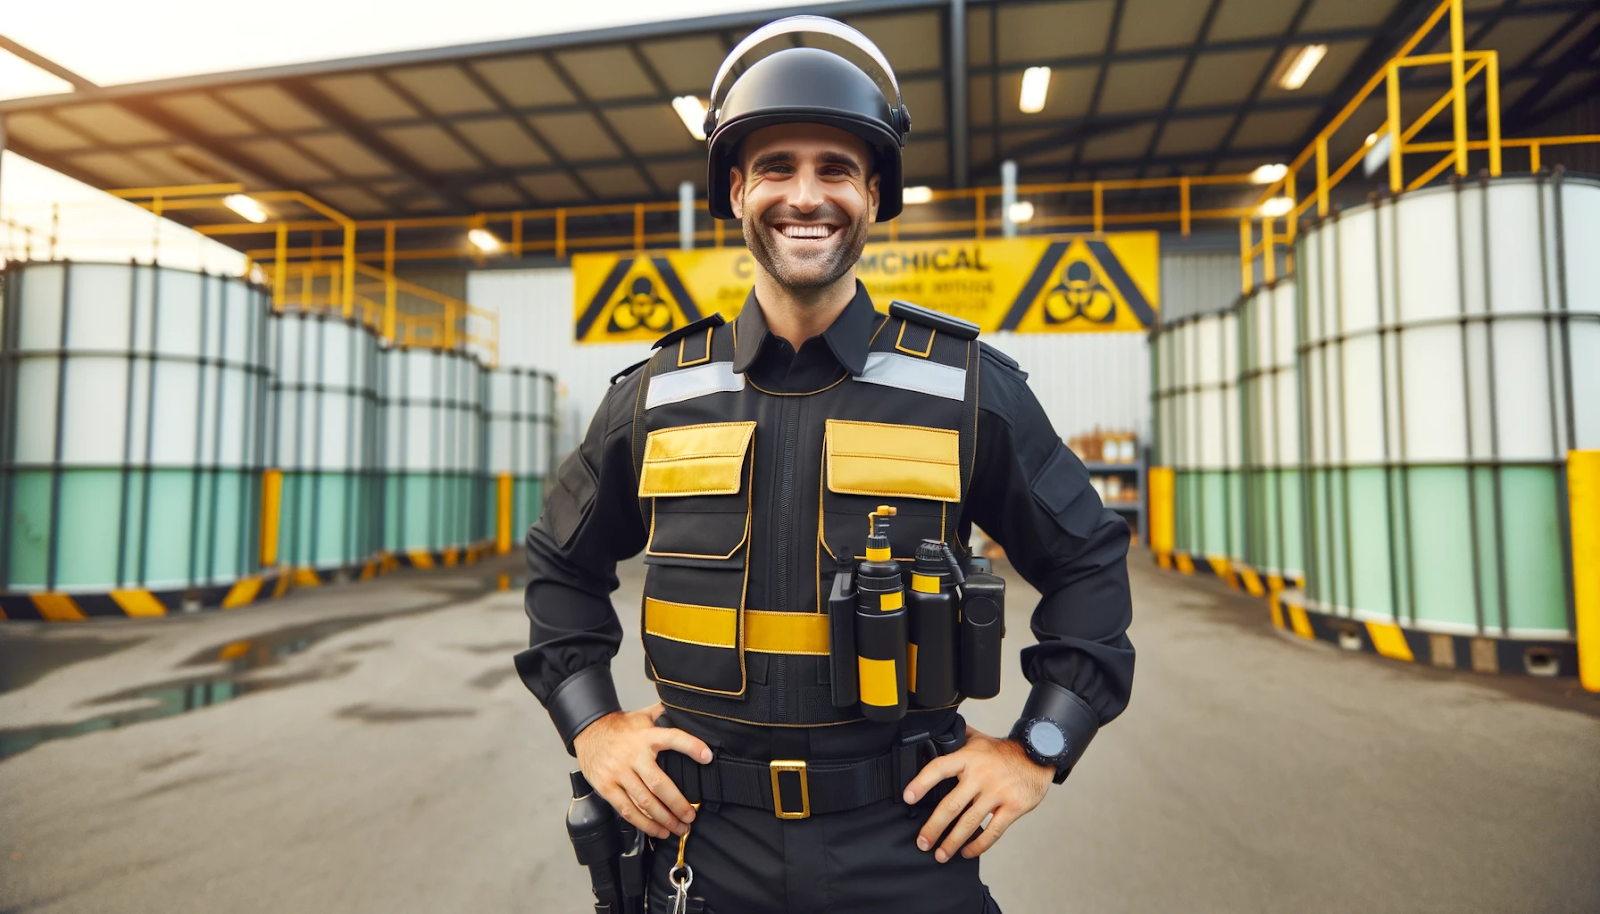 A cheerful security guard in a black and gold uniform, equipped with safety gear, is ready to respond to a chemical threat.